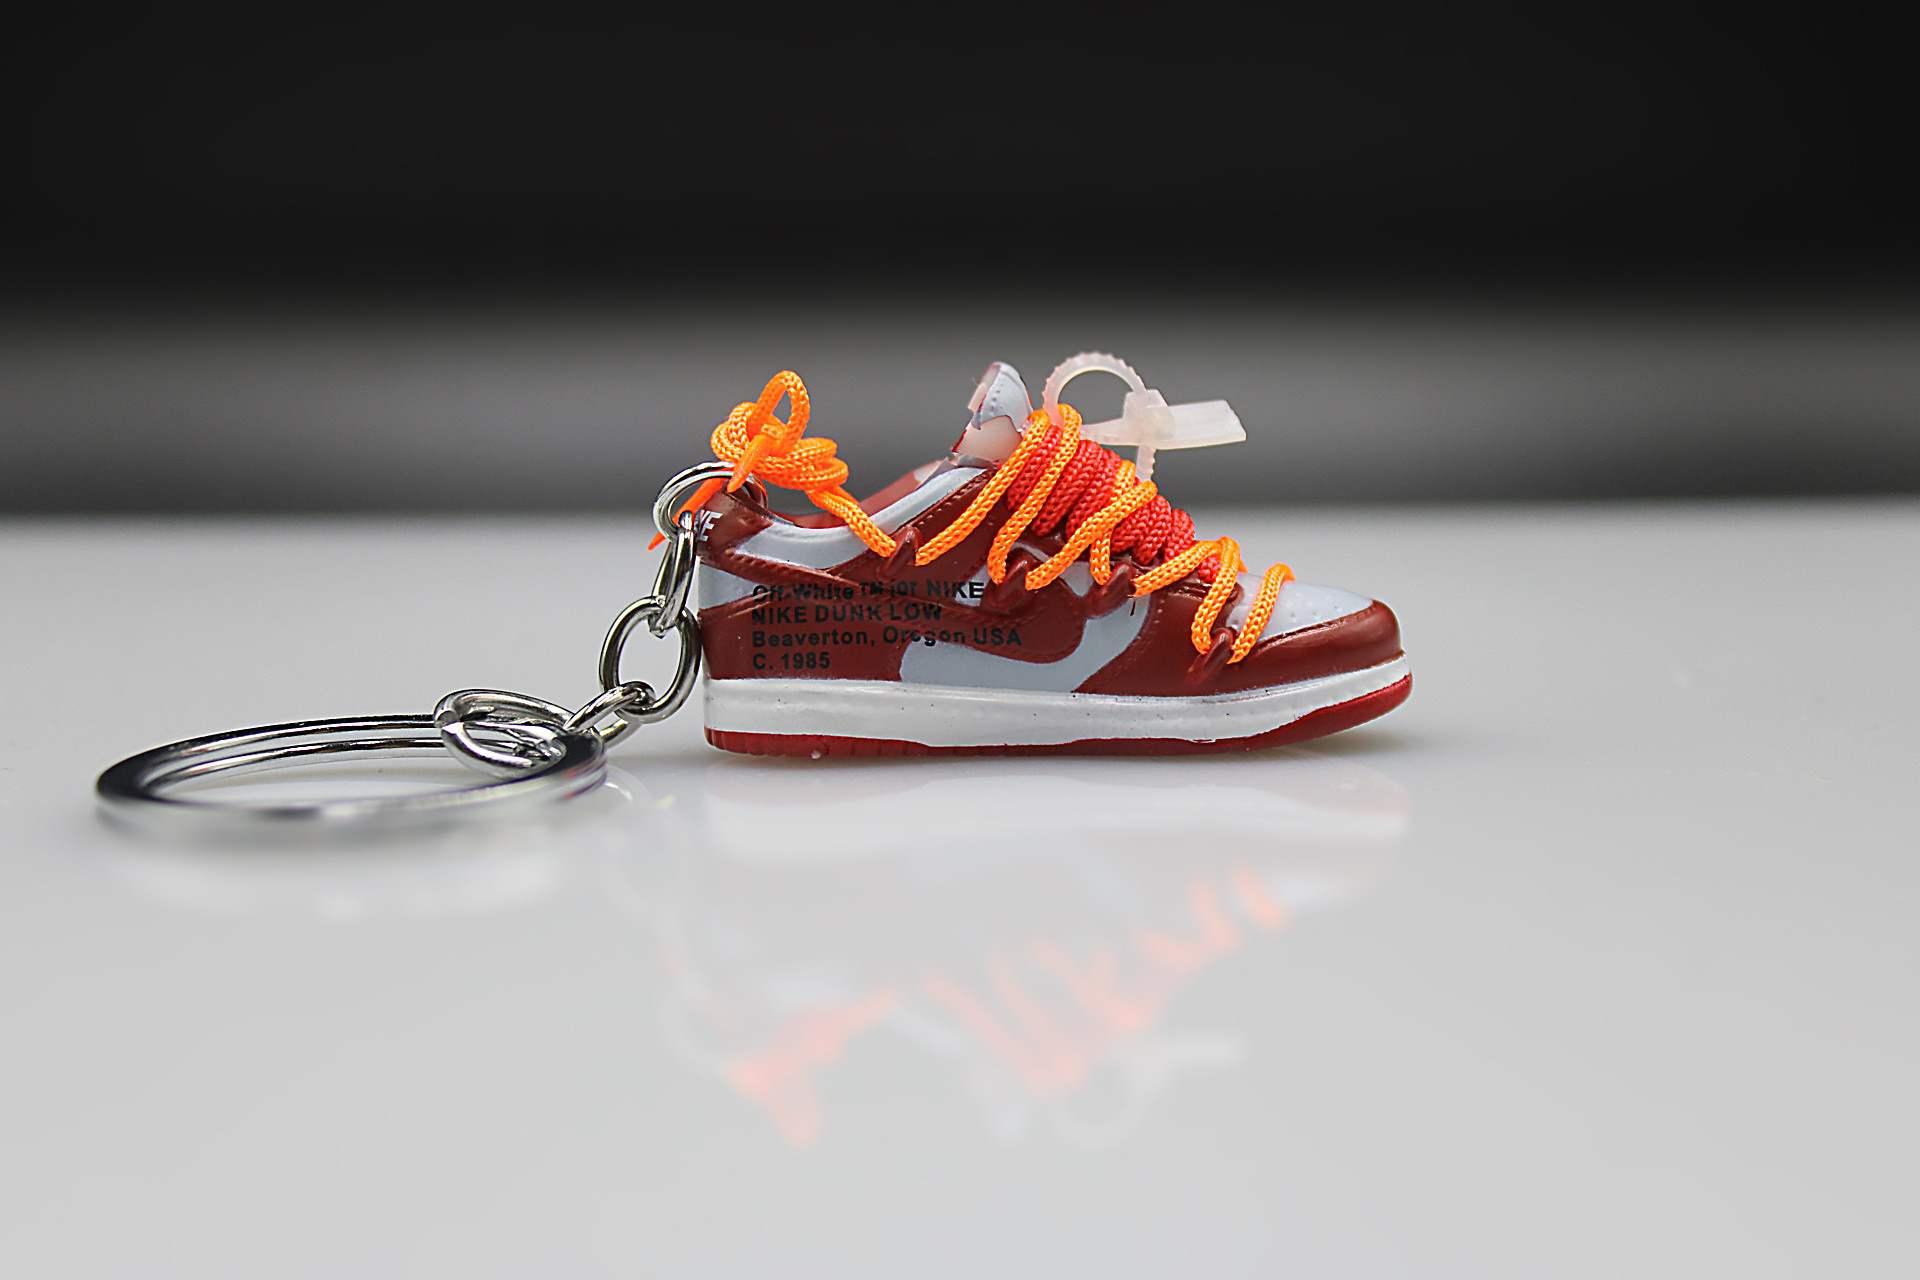 Porte-clés Sneakers 3D - Nike Dunk Low X Off White - University Red